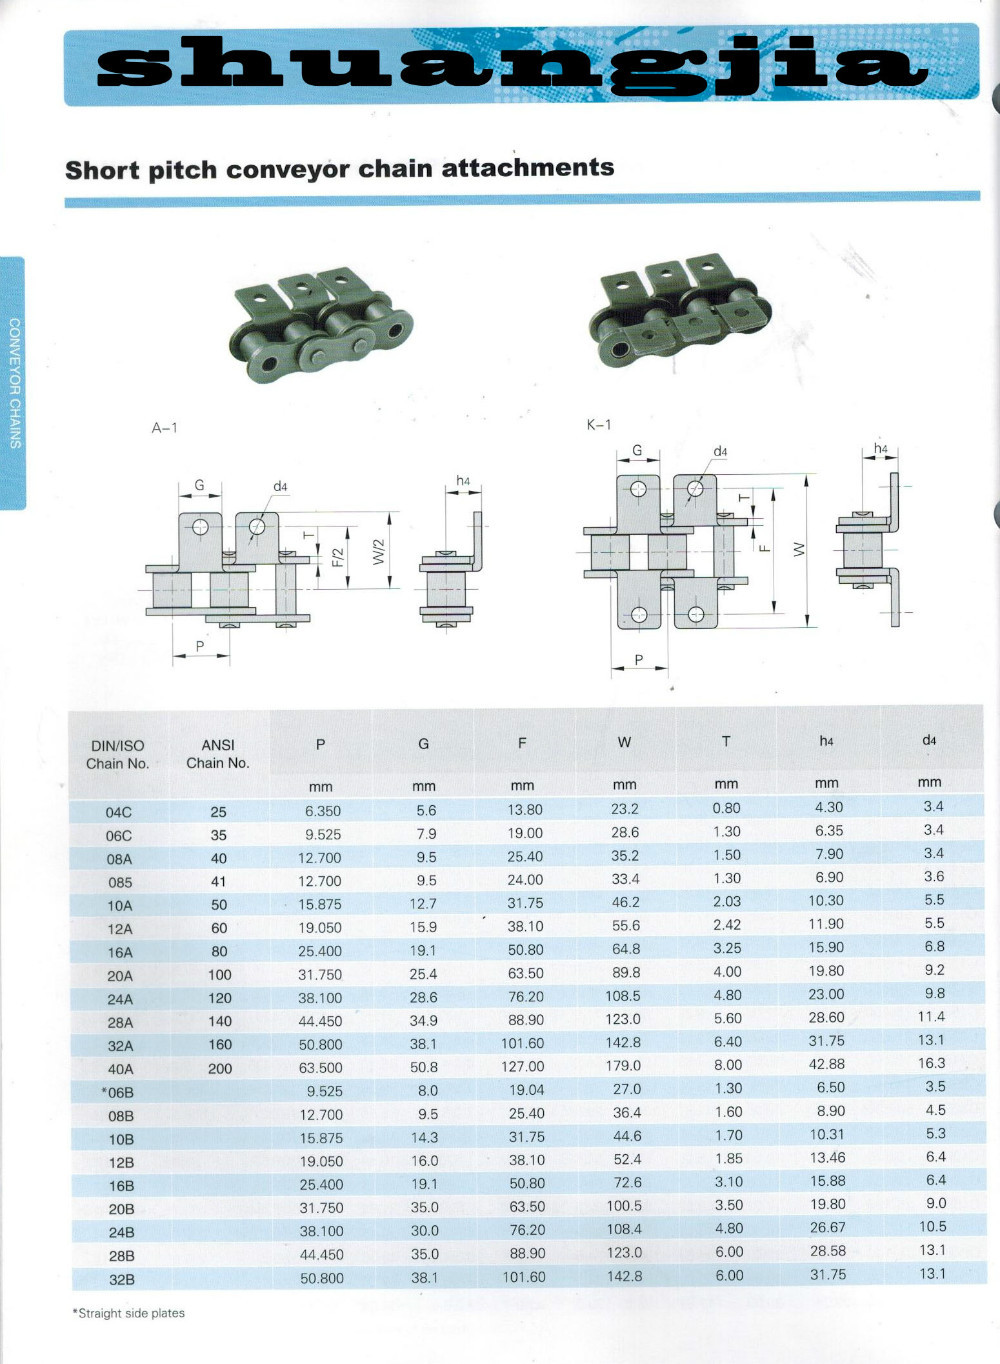 made in china,, china supplier,overhead conveyor,120,transmission